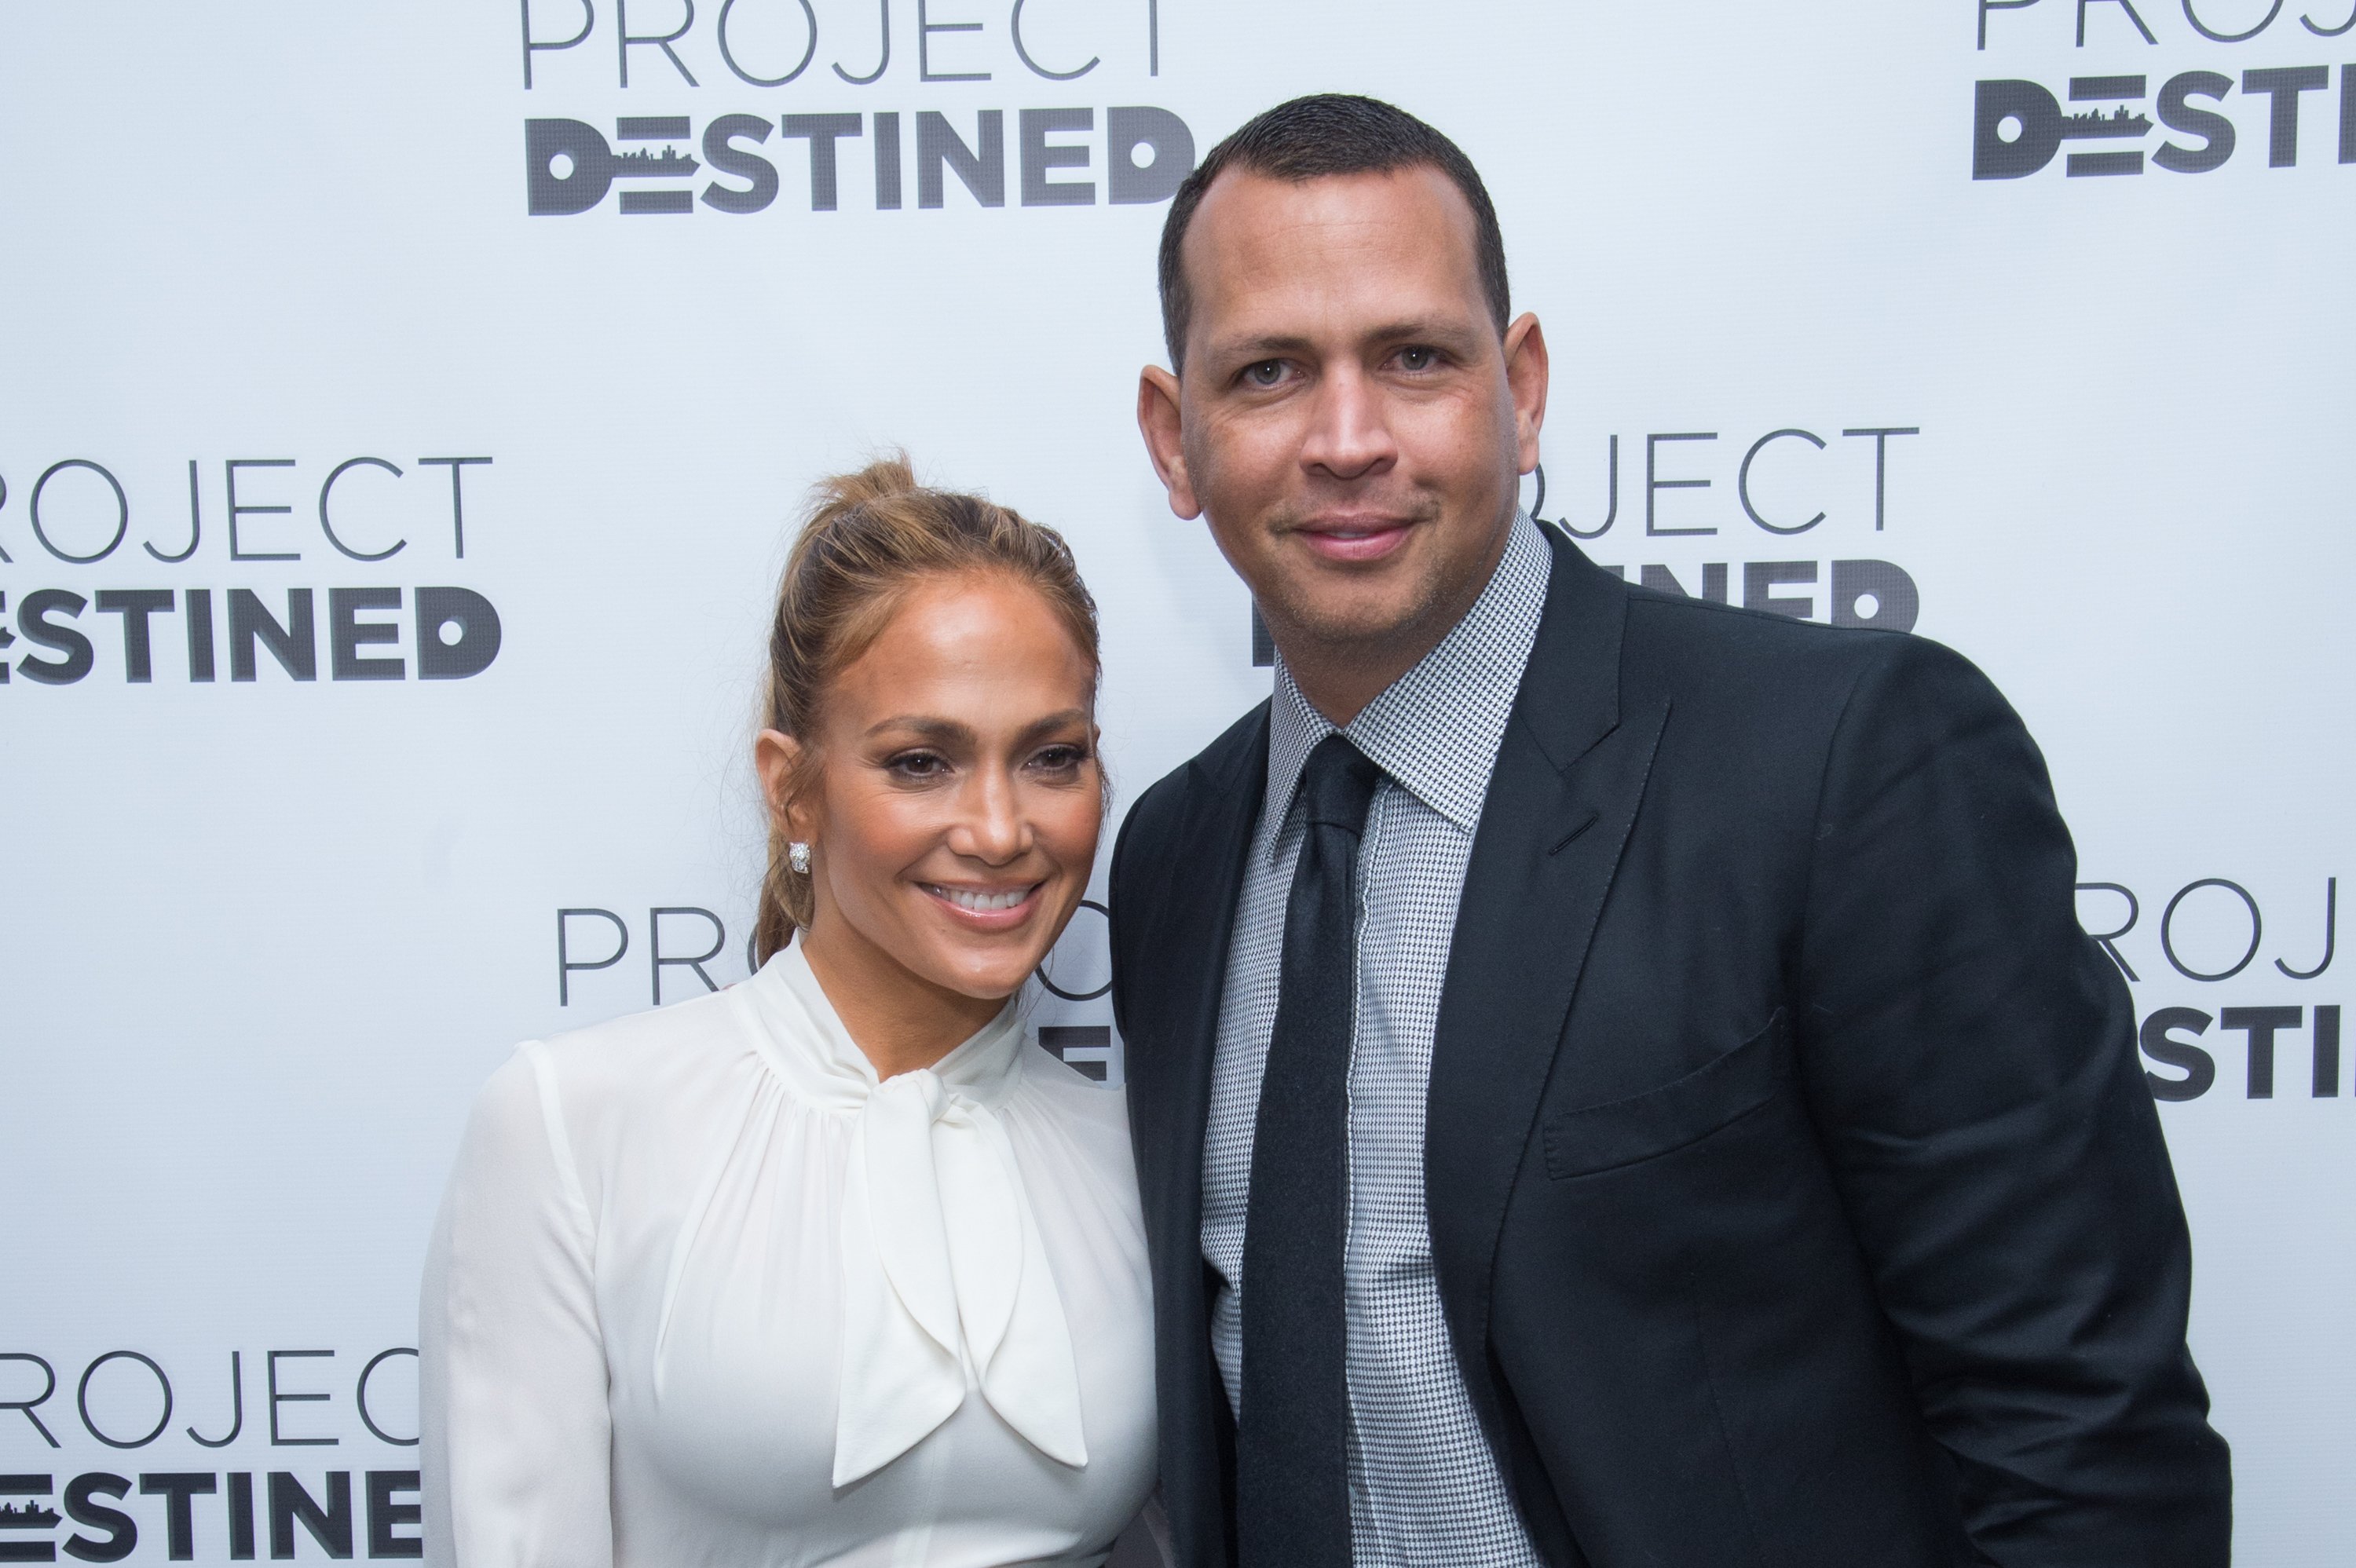 Jennifer Lopez and Alex Rodriguez attending "Project Destined" Yankees Shark Tank Presentations at the Yankee Stadium in March 2018. | Photo: Getty Images